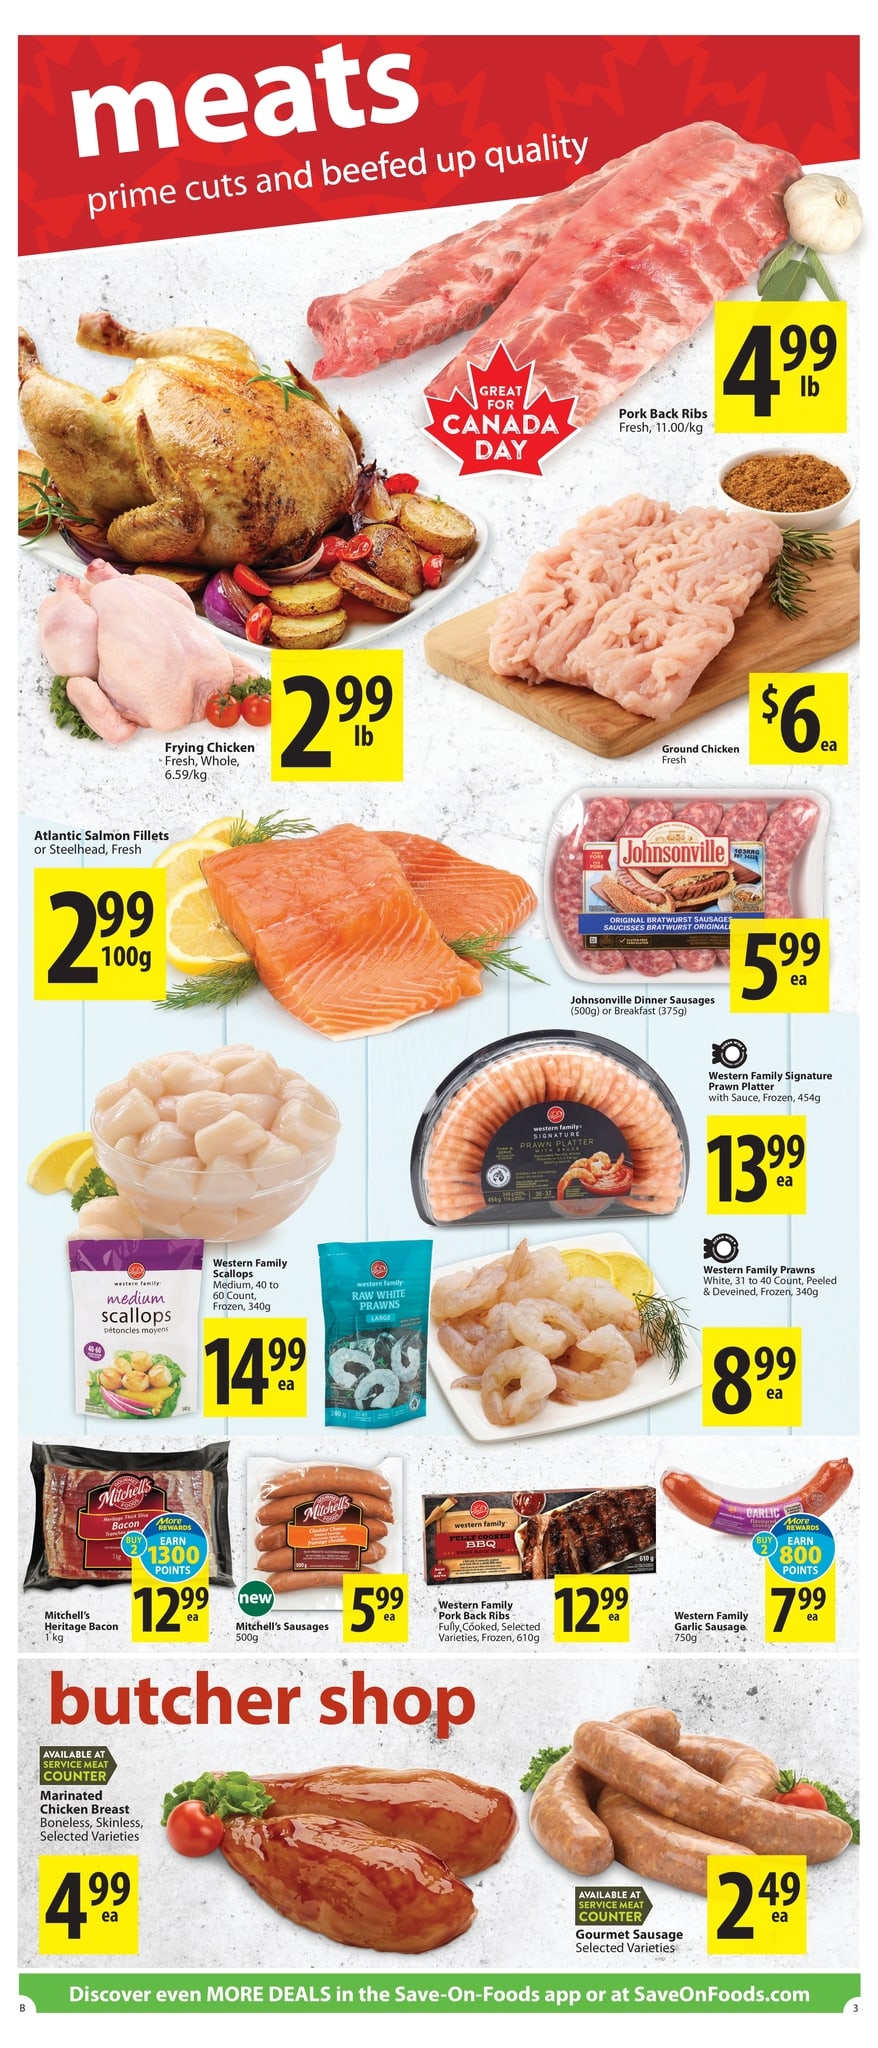 Save-On-Foods - Weekly Flyer Specials - Page 3